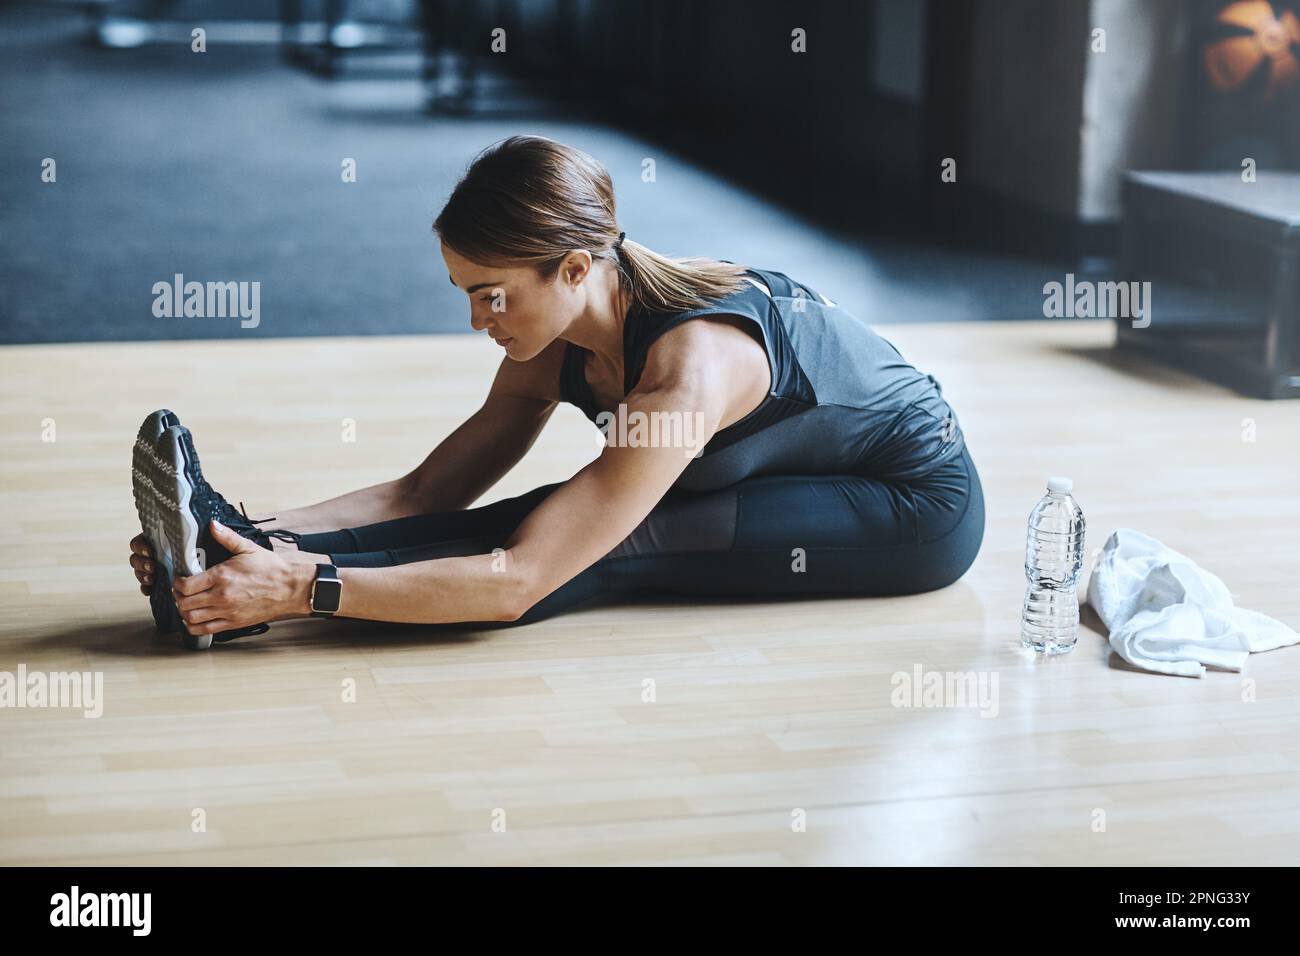 Premium Photo  Woman stretches her legs and warms up before having a  dumbbell workout in the gym with water bottle ready next to her.